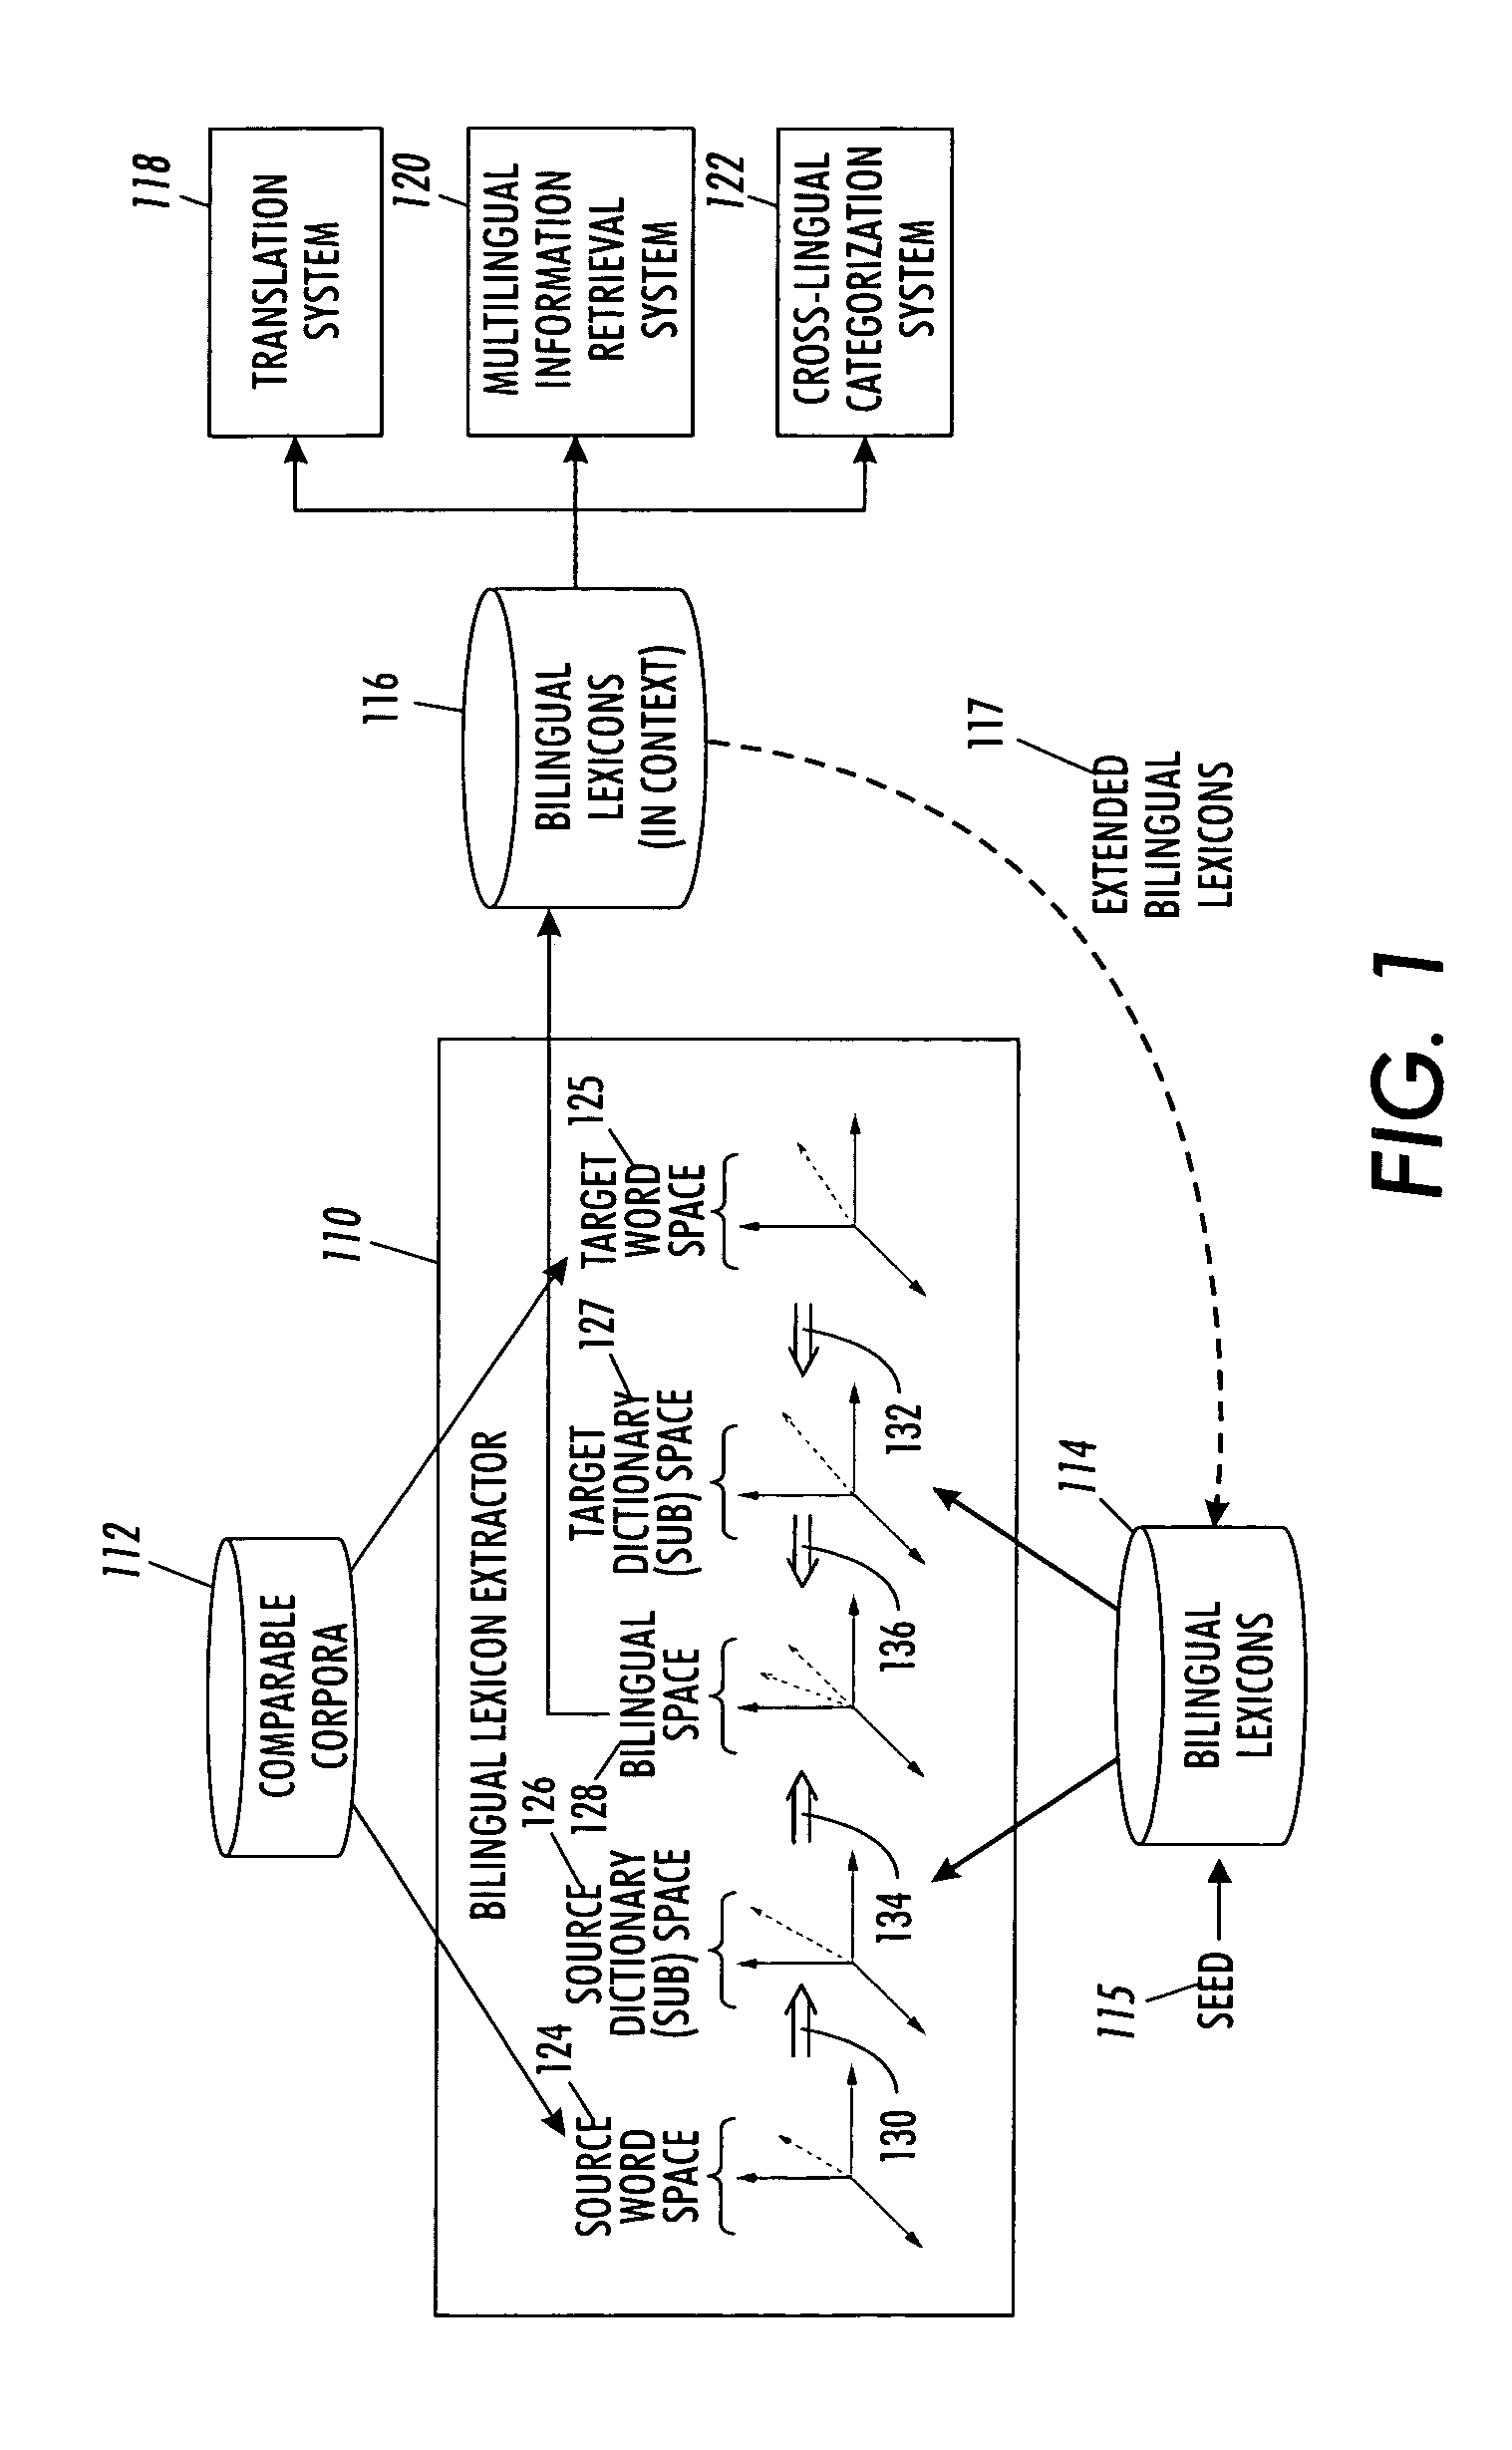 Methods and apparatuses for identifying bilingual lexicons in comparable corpora using geometric processing